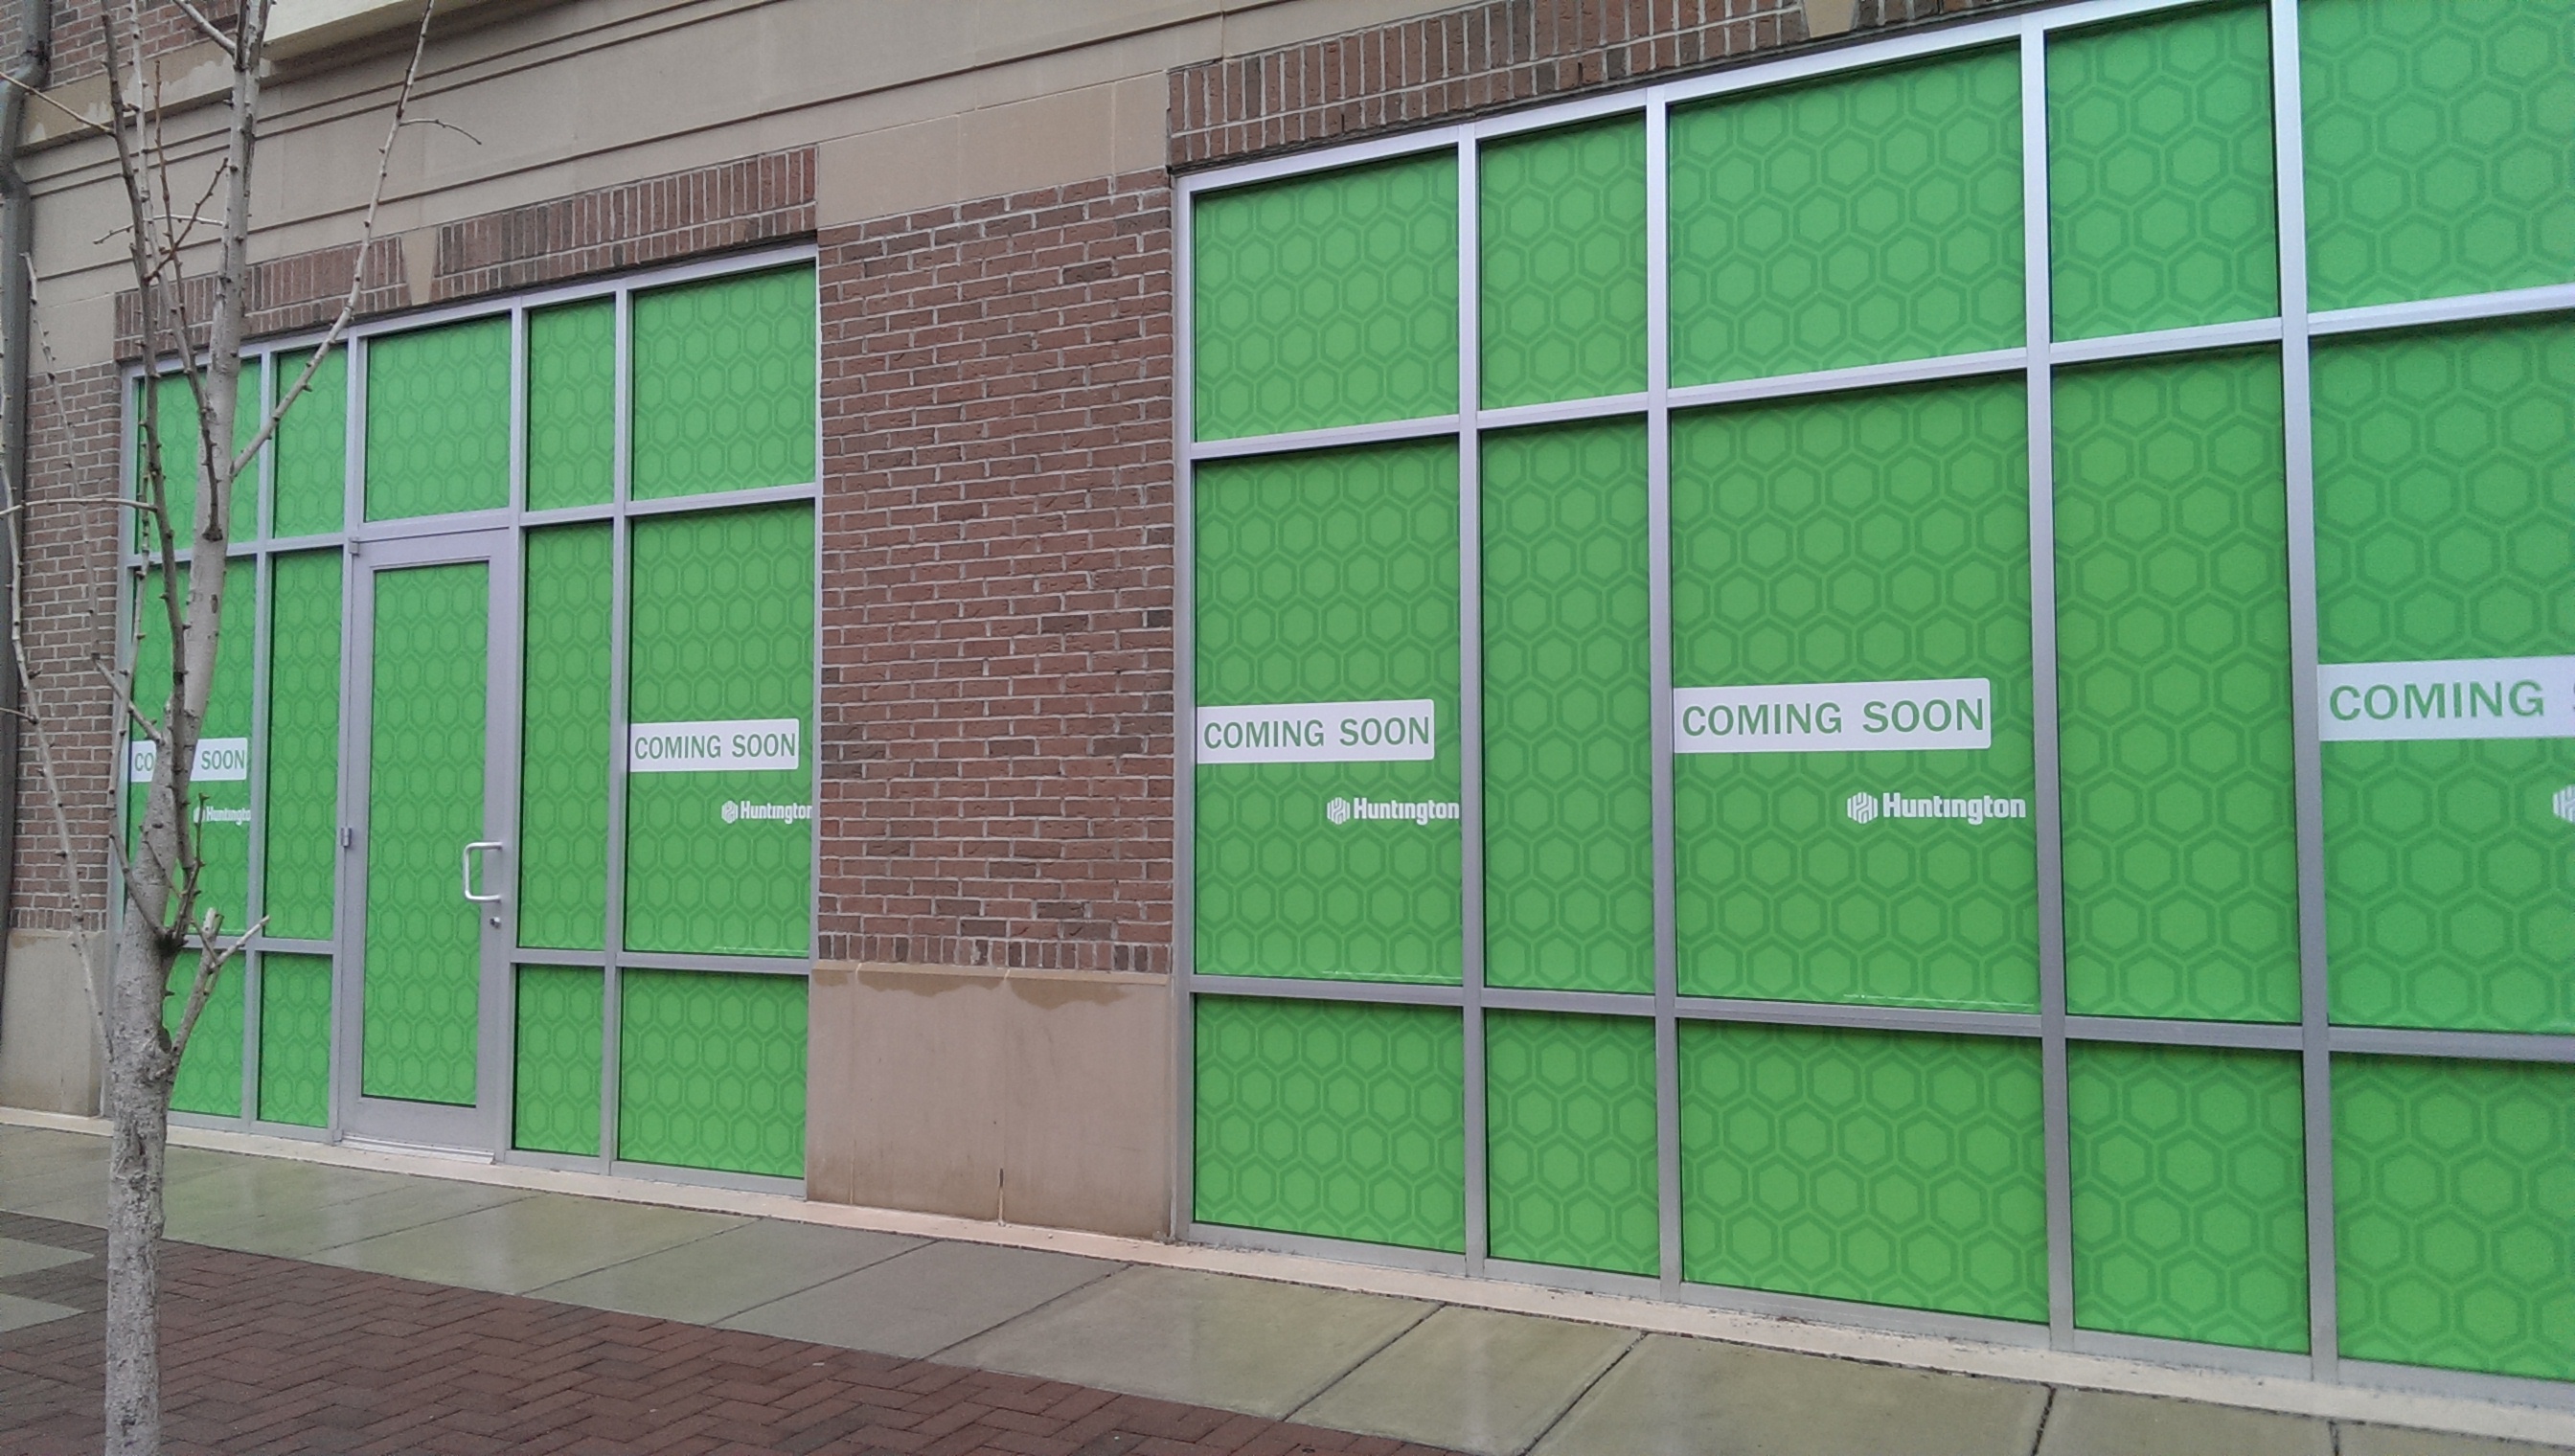 Huntington Bank’s planned Sophia Square branch won’t have a drive-thru. (Staff photo)